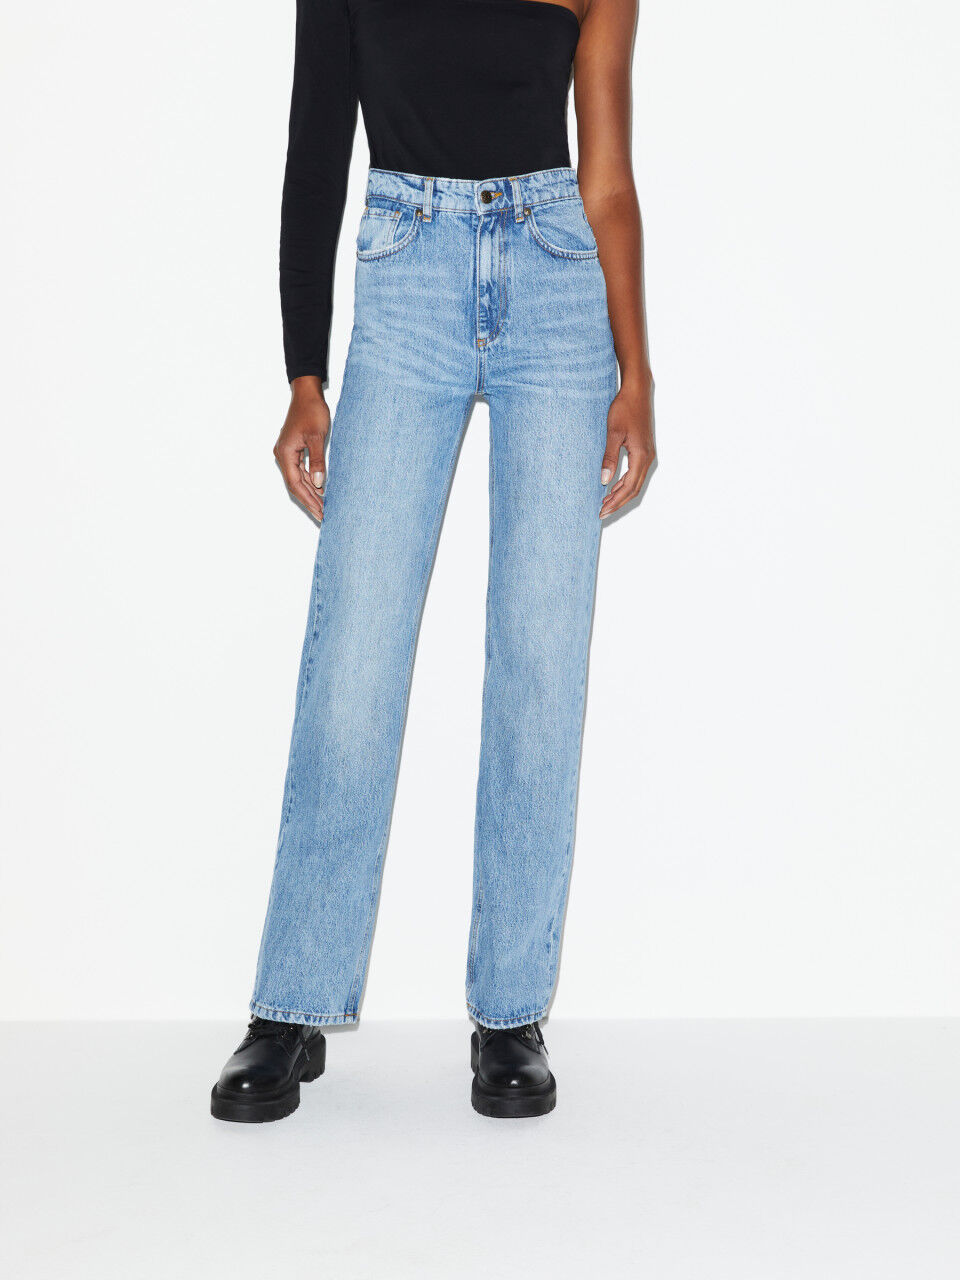 Jeans high waist straight fit